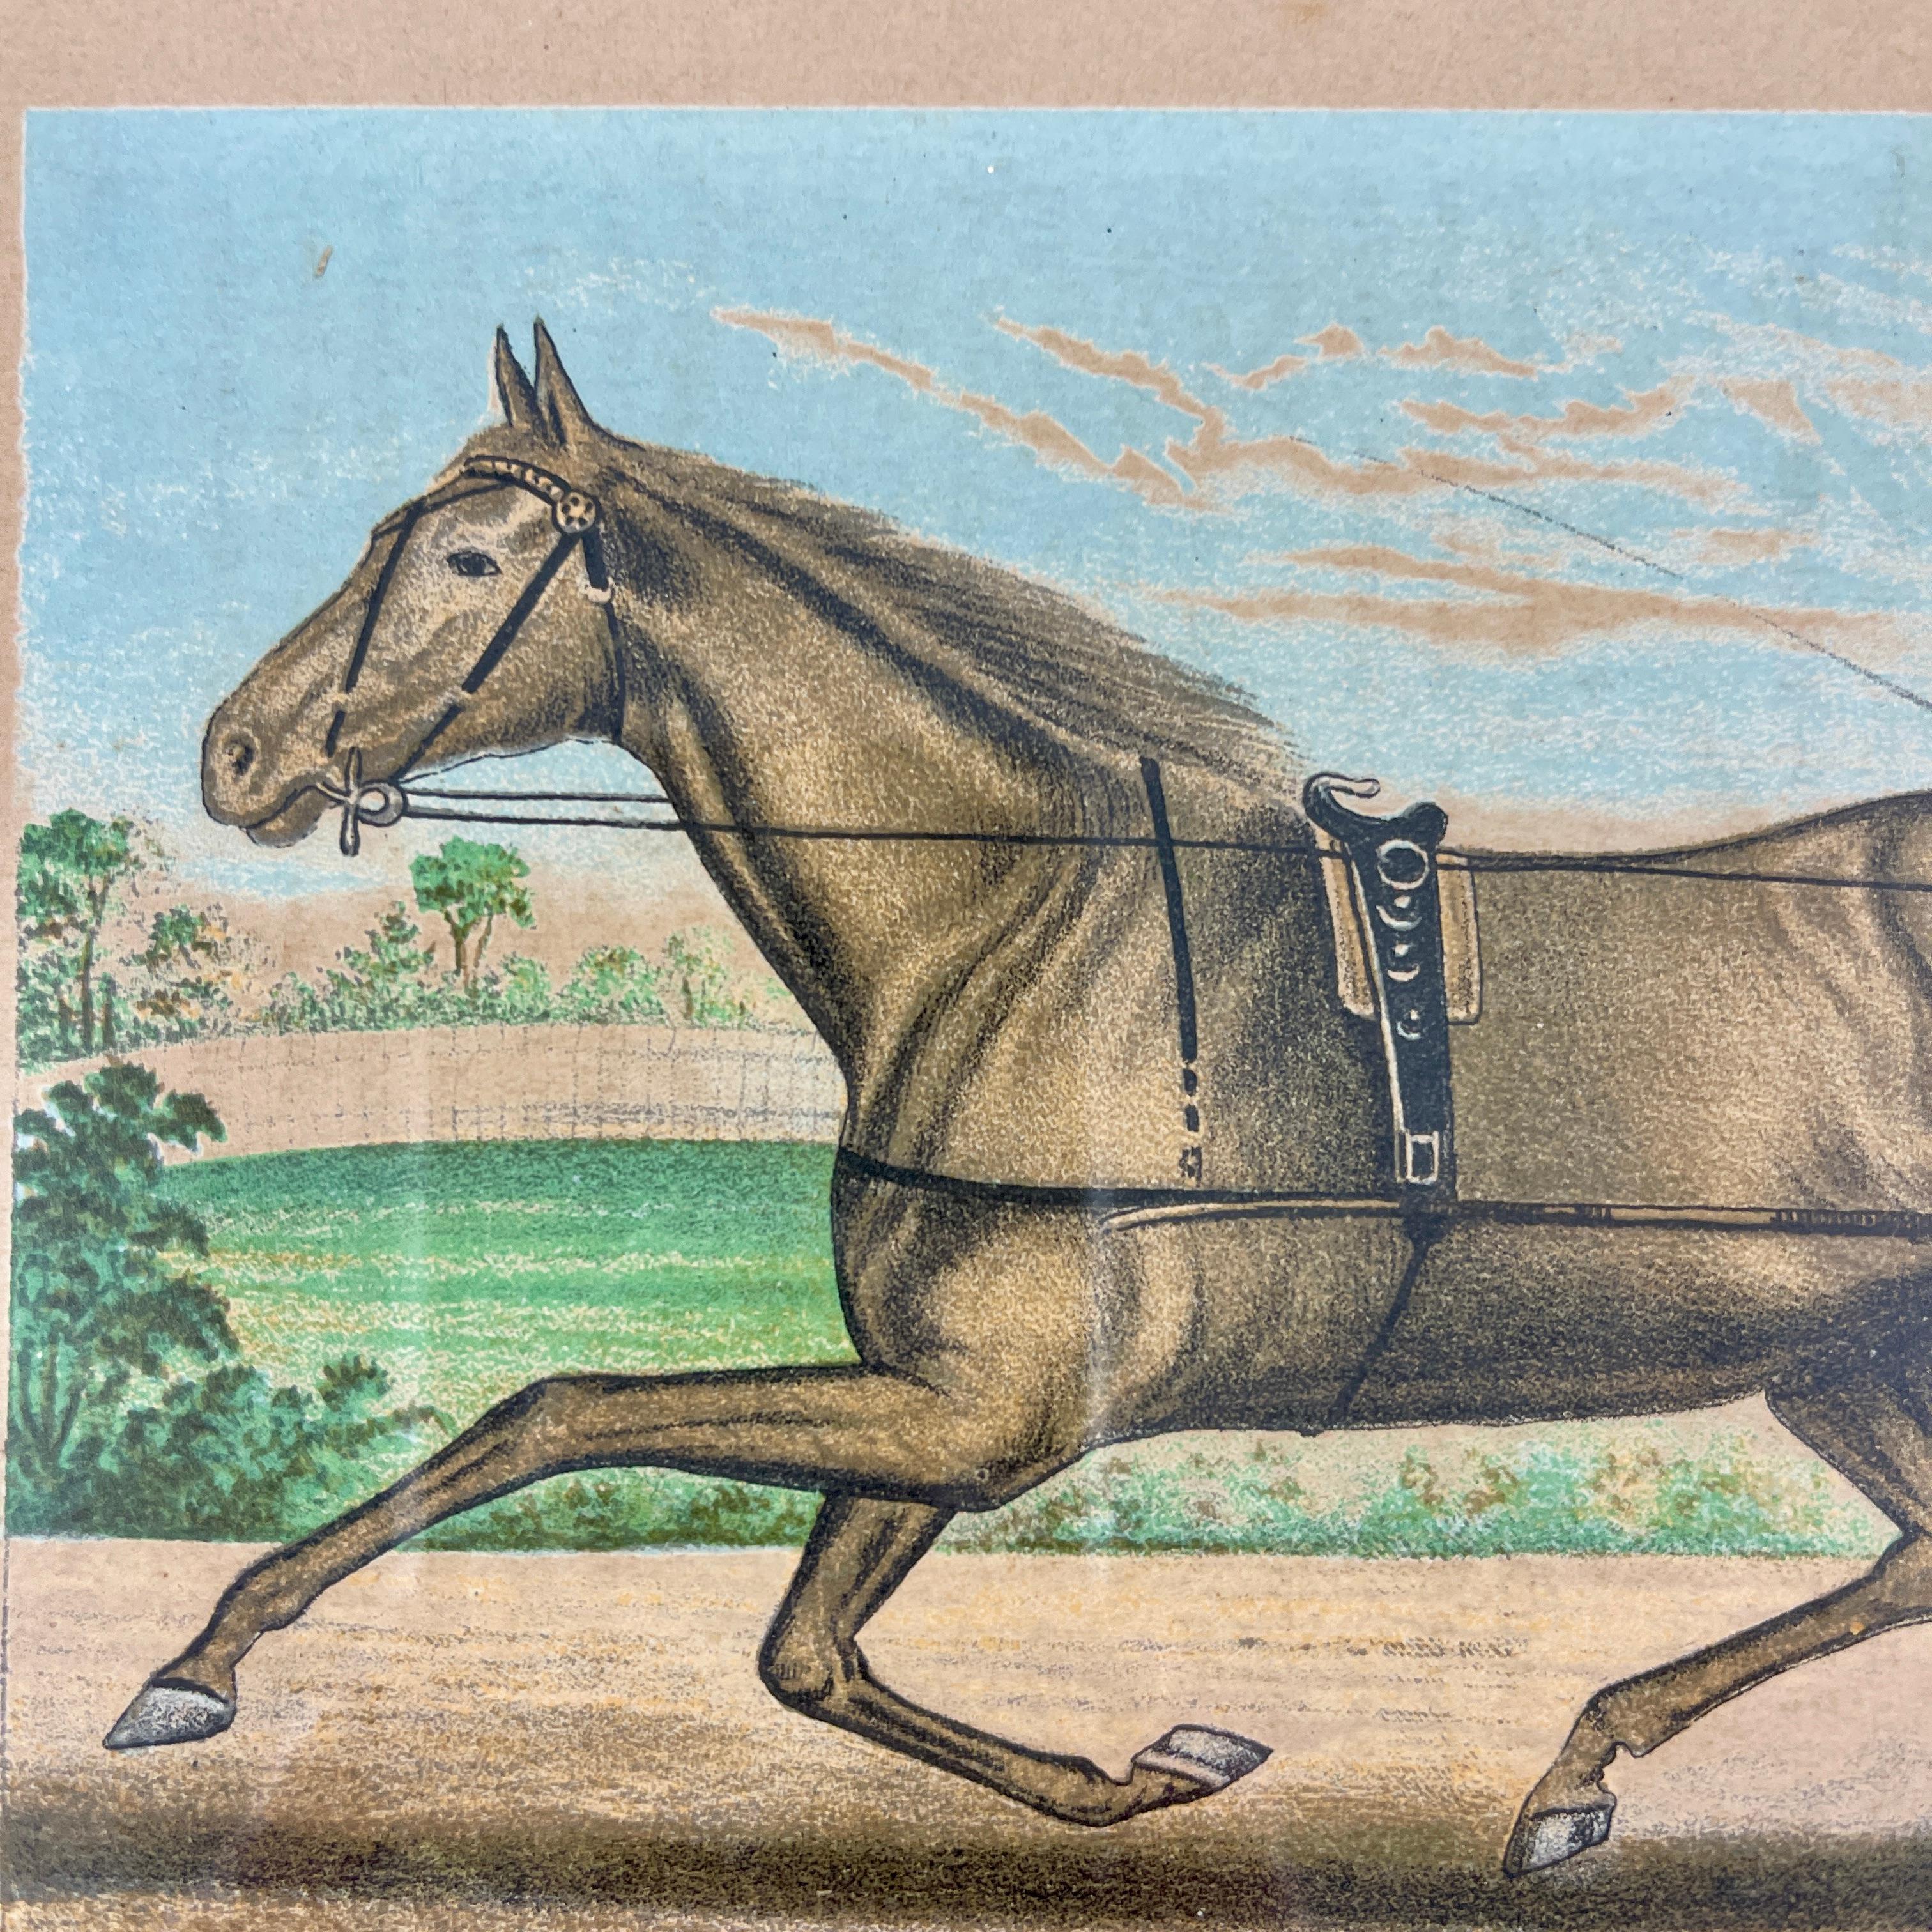 Framed Race Horse Champions Original Chromolithographs Printed in 1882, Set /3 For Sale 2